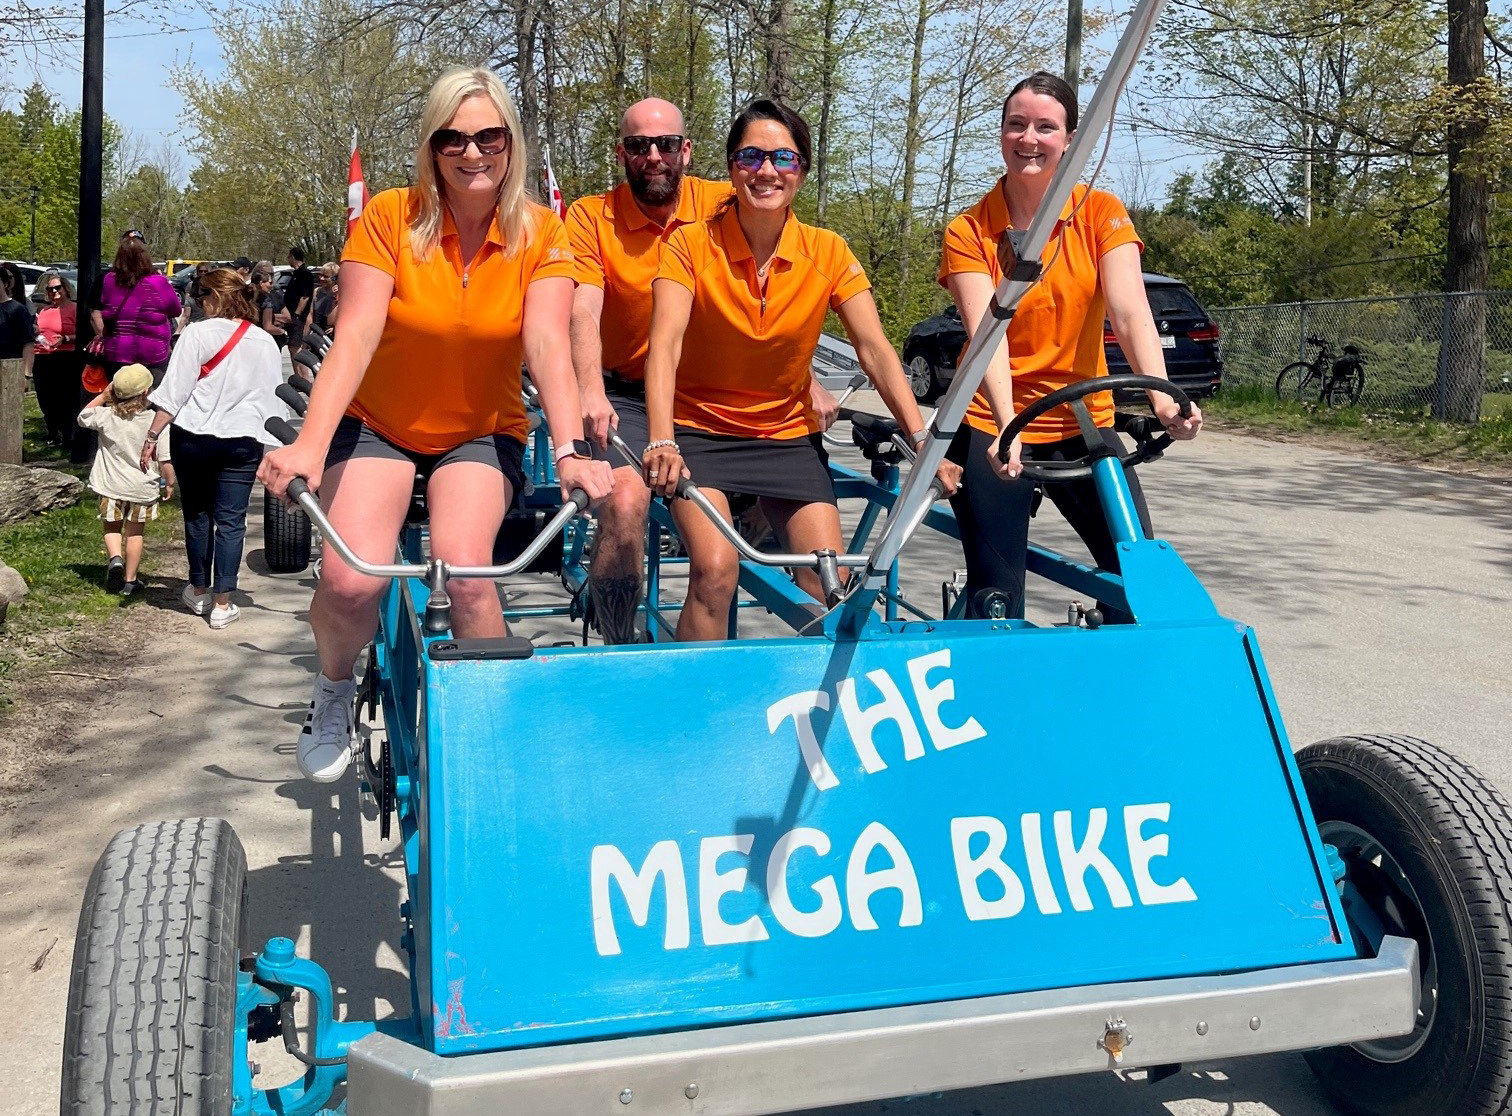 Image - Group Photo - Employees are riding a bike